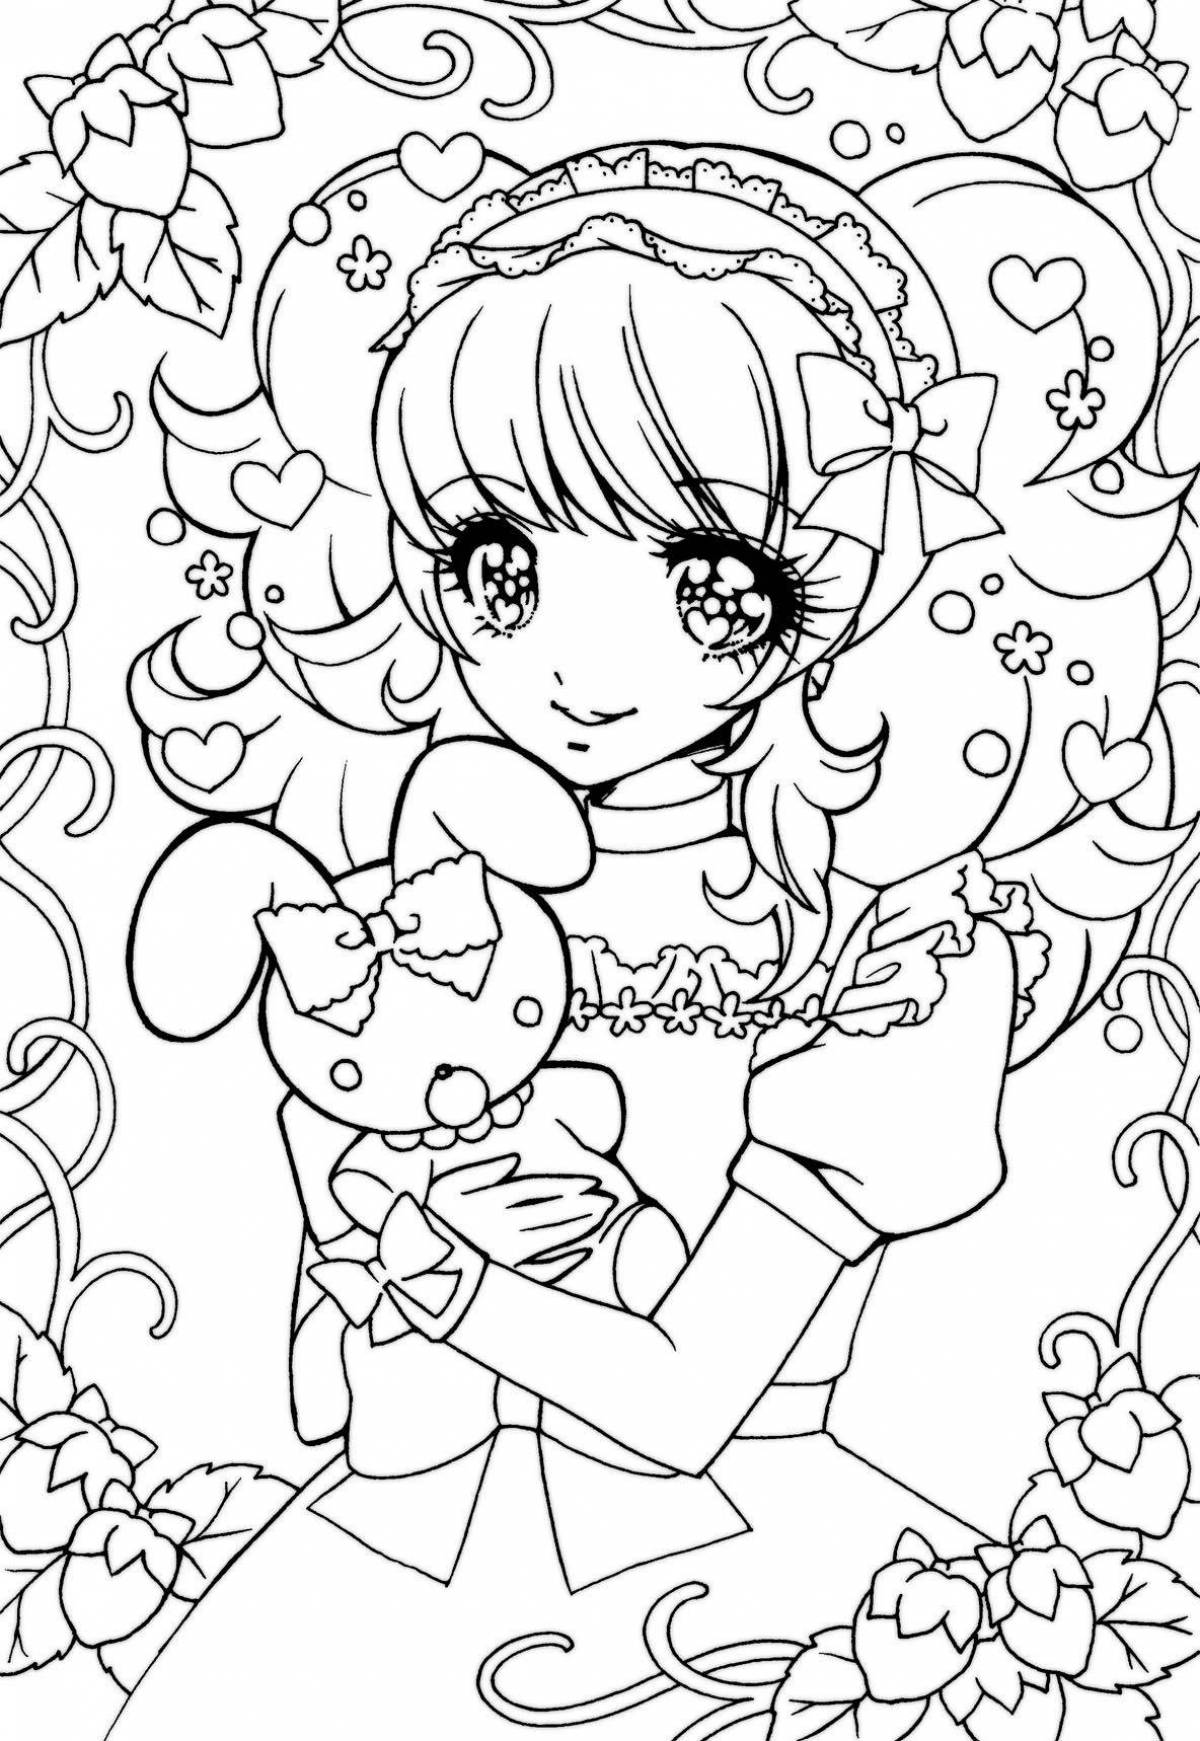 Radiant anime christmas coloring page